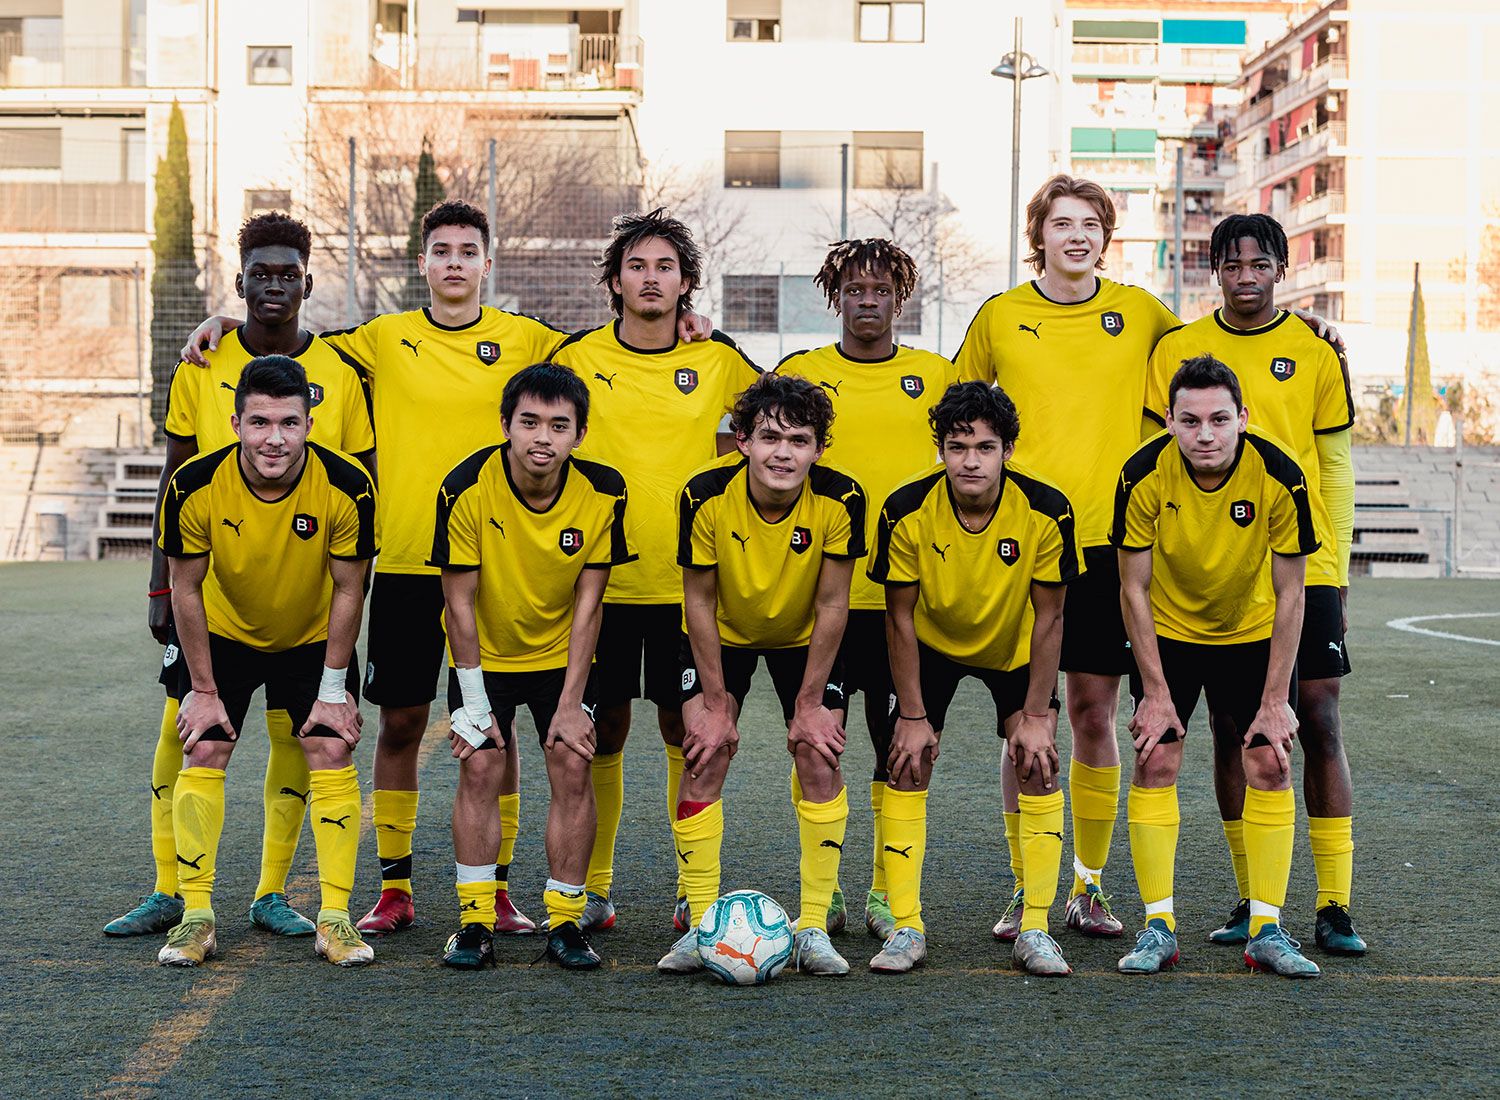 B1 players compete against FAF Hospitalet